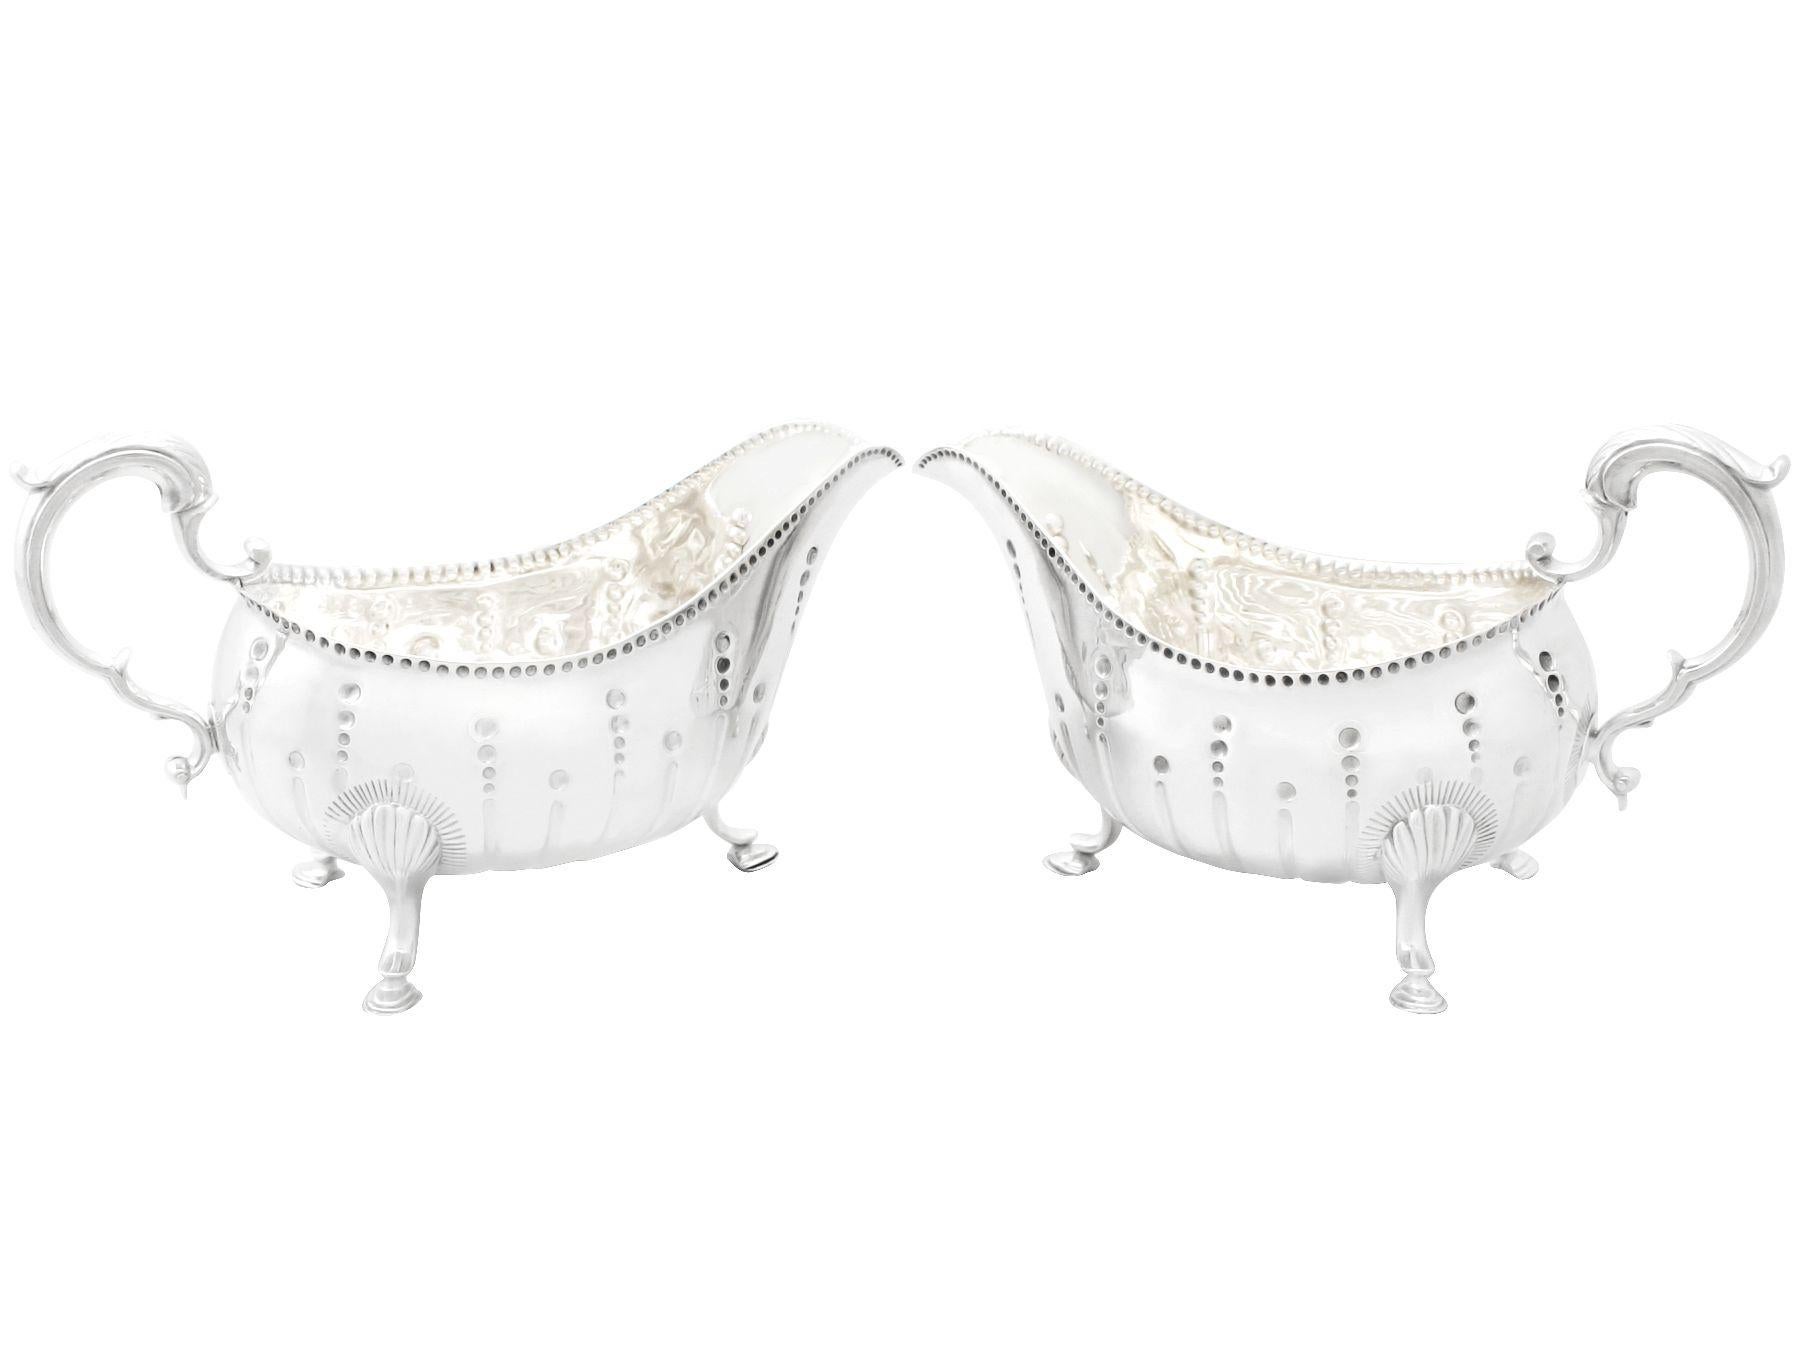 An exceptional, fine and impressive pair of antique George III Irish sterling silver sauceboats or gravy boats; an addition to our Georgian dining silverware collection.

These fine antique Georgian Irish sterling silver sauceboats have a plain